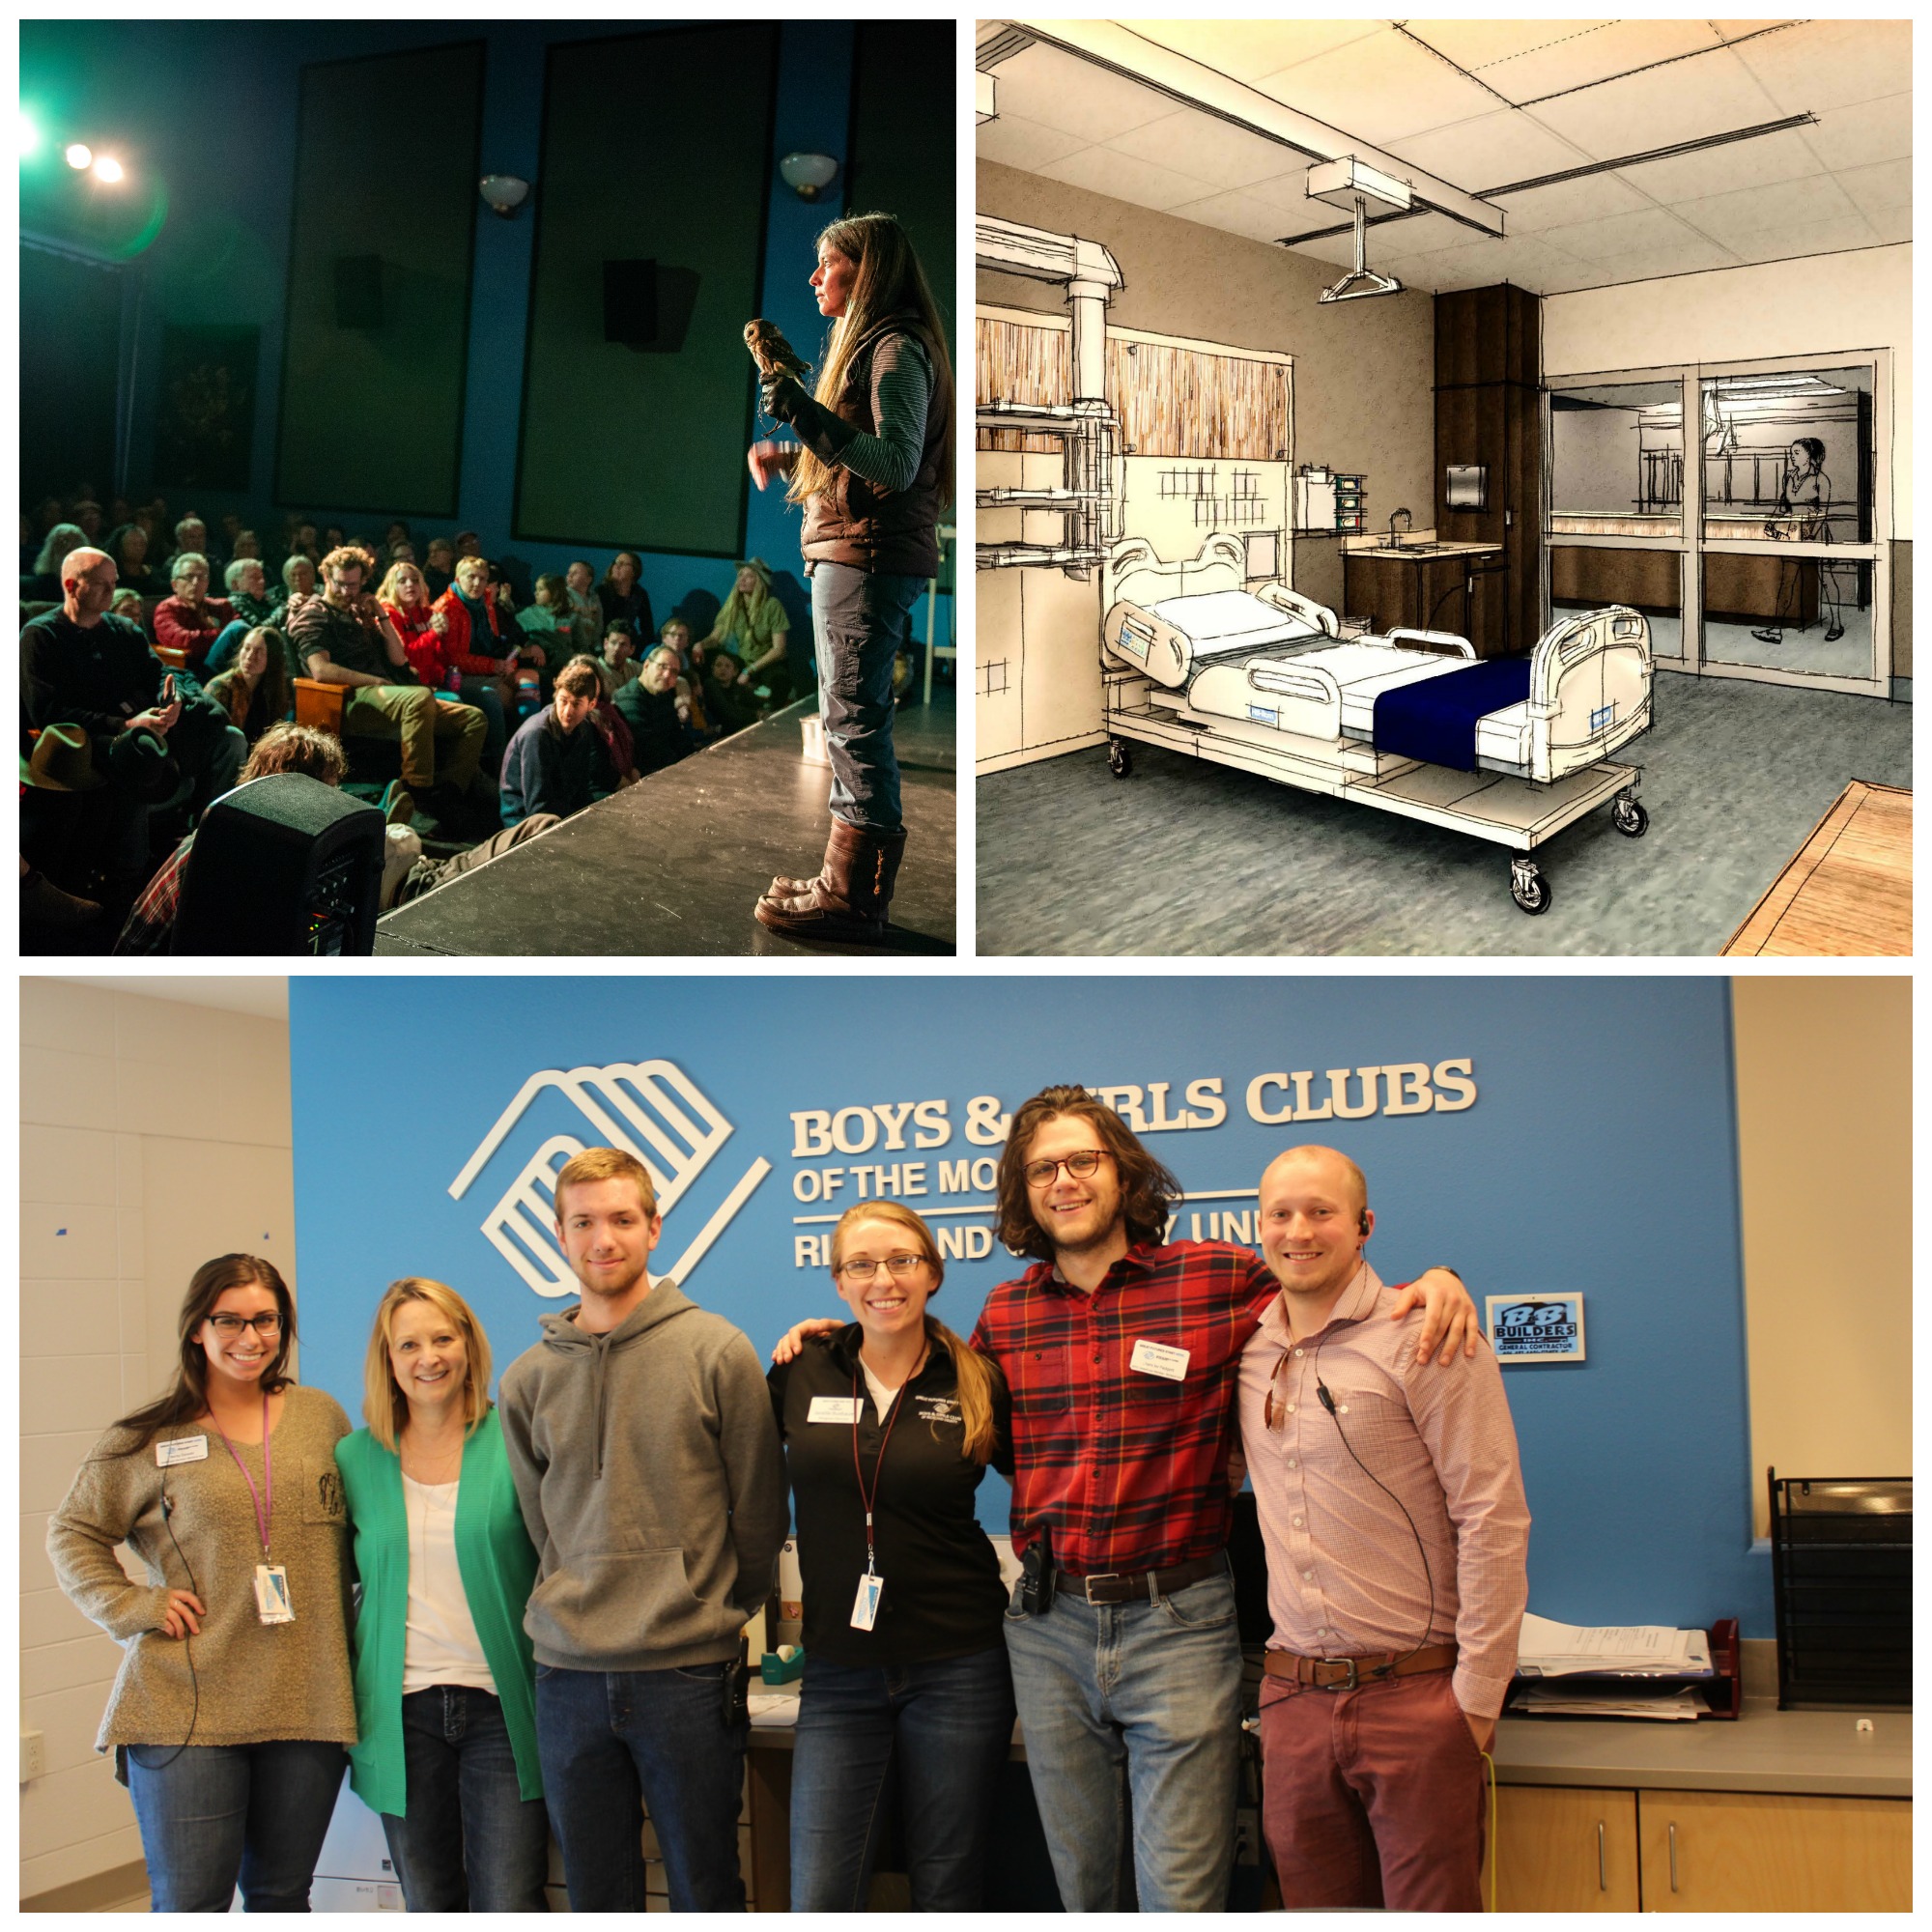 Image 1: a woman holding a small owl stands on stage while an audience looks at her. Image 2: a design sketch of a hospital room with a patient bed in the middle. Image 3: six young adults smile for the camera in front of a desk that says "Boys and Girls Clubs" behind it. 